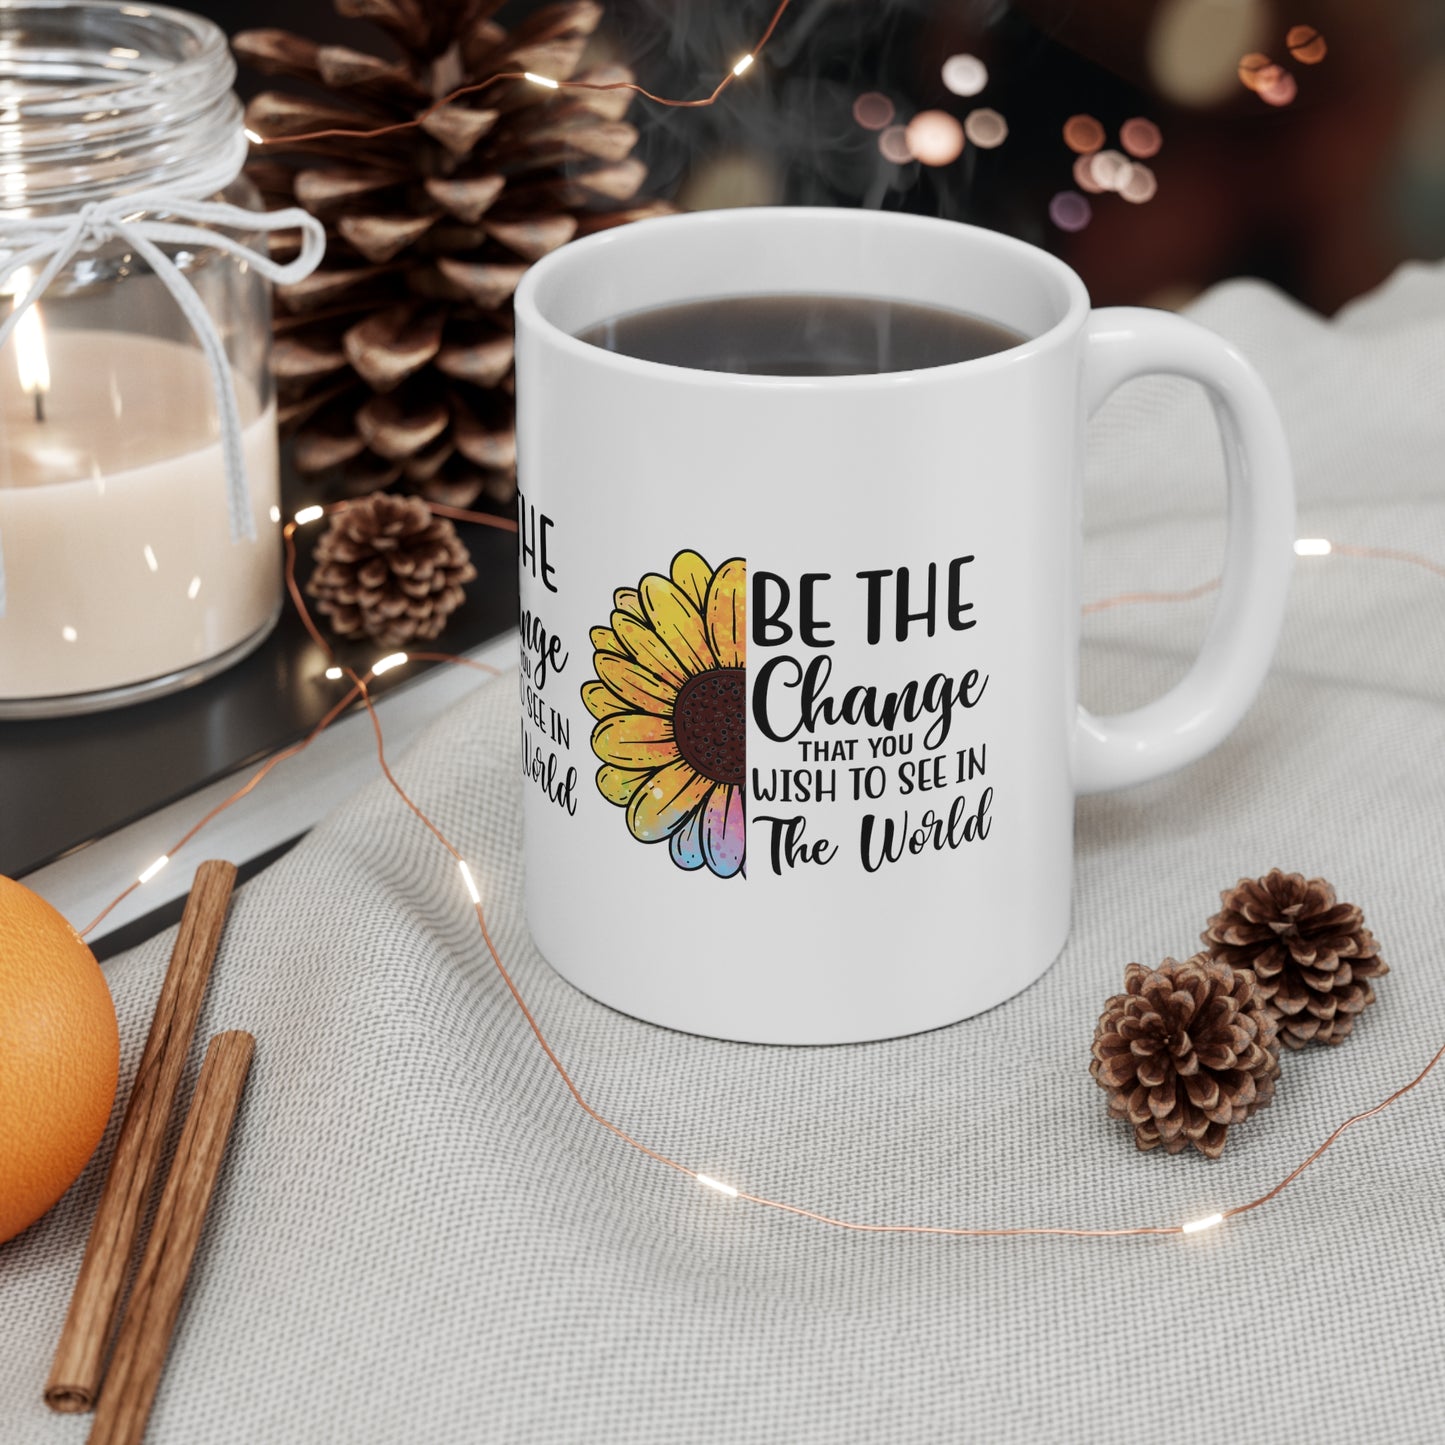 "BE THE CHANGE THAT YOU WISH TO SEE IN THE WORLD" Mug - Mugscity23™️ - Free Shipping